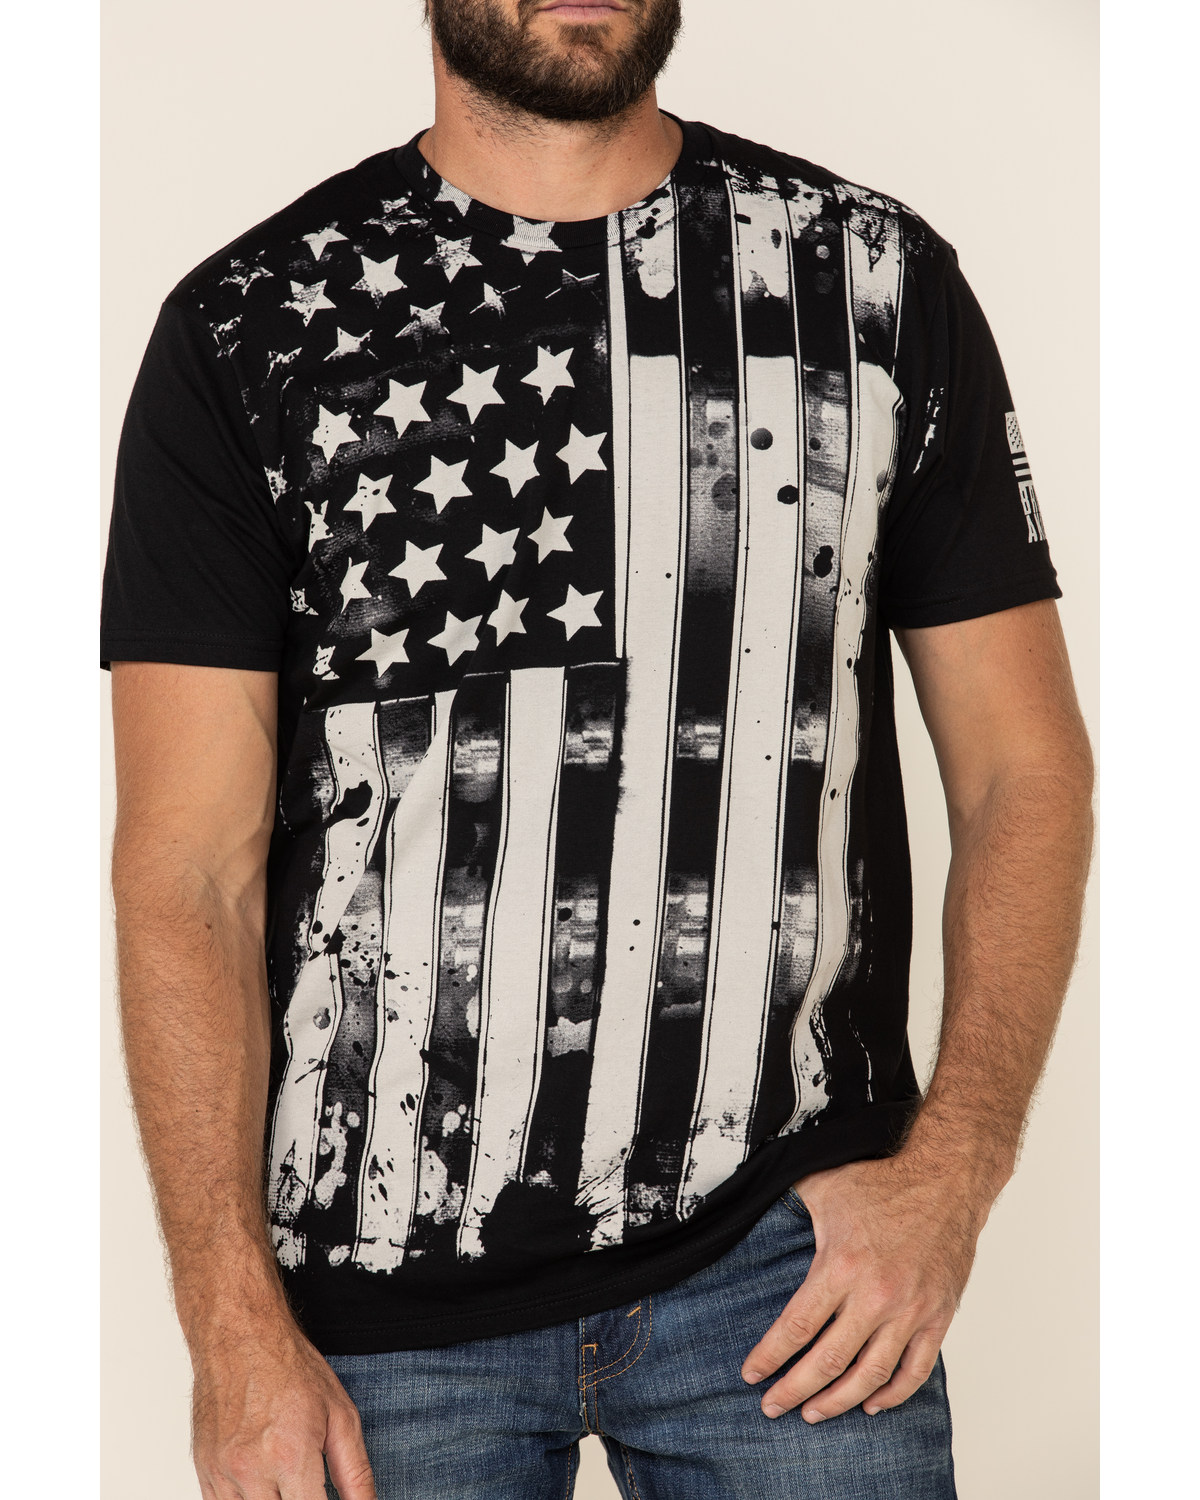 Brothers & Arms Men's Old Glory Flag Graphic T-Shirt